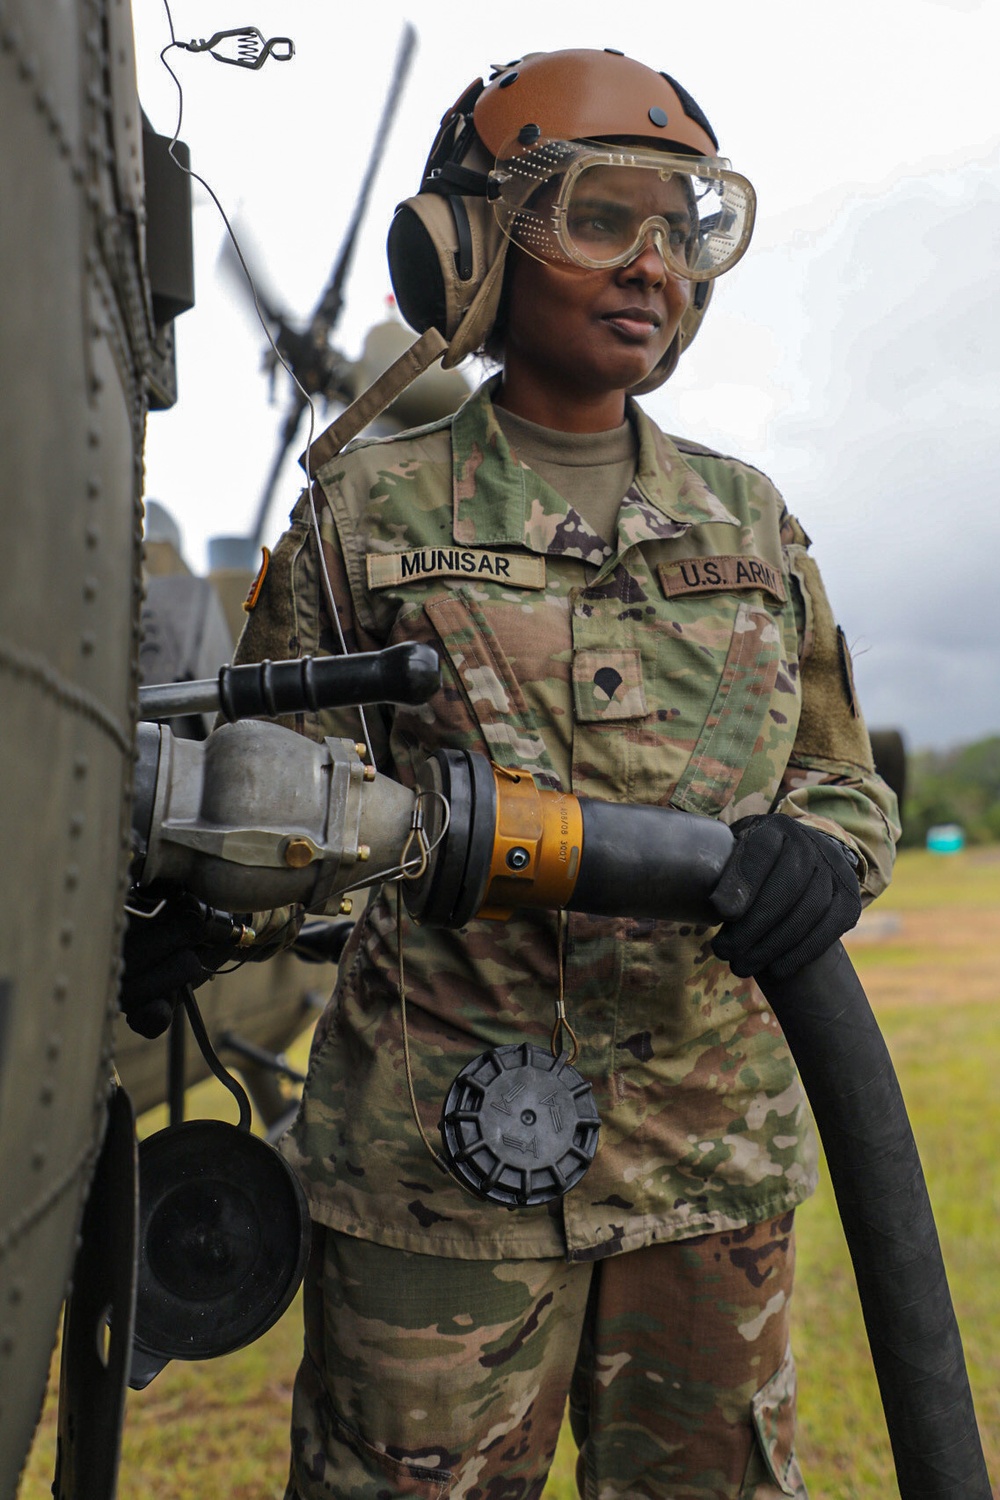 Aviation Brigade practices “Fat Cow” fueling operation